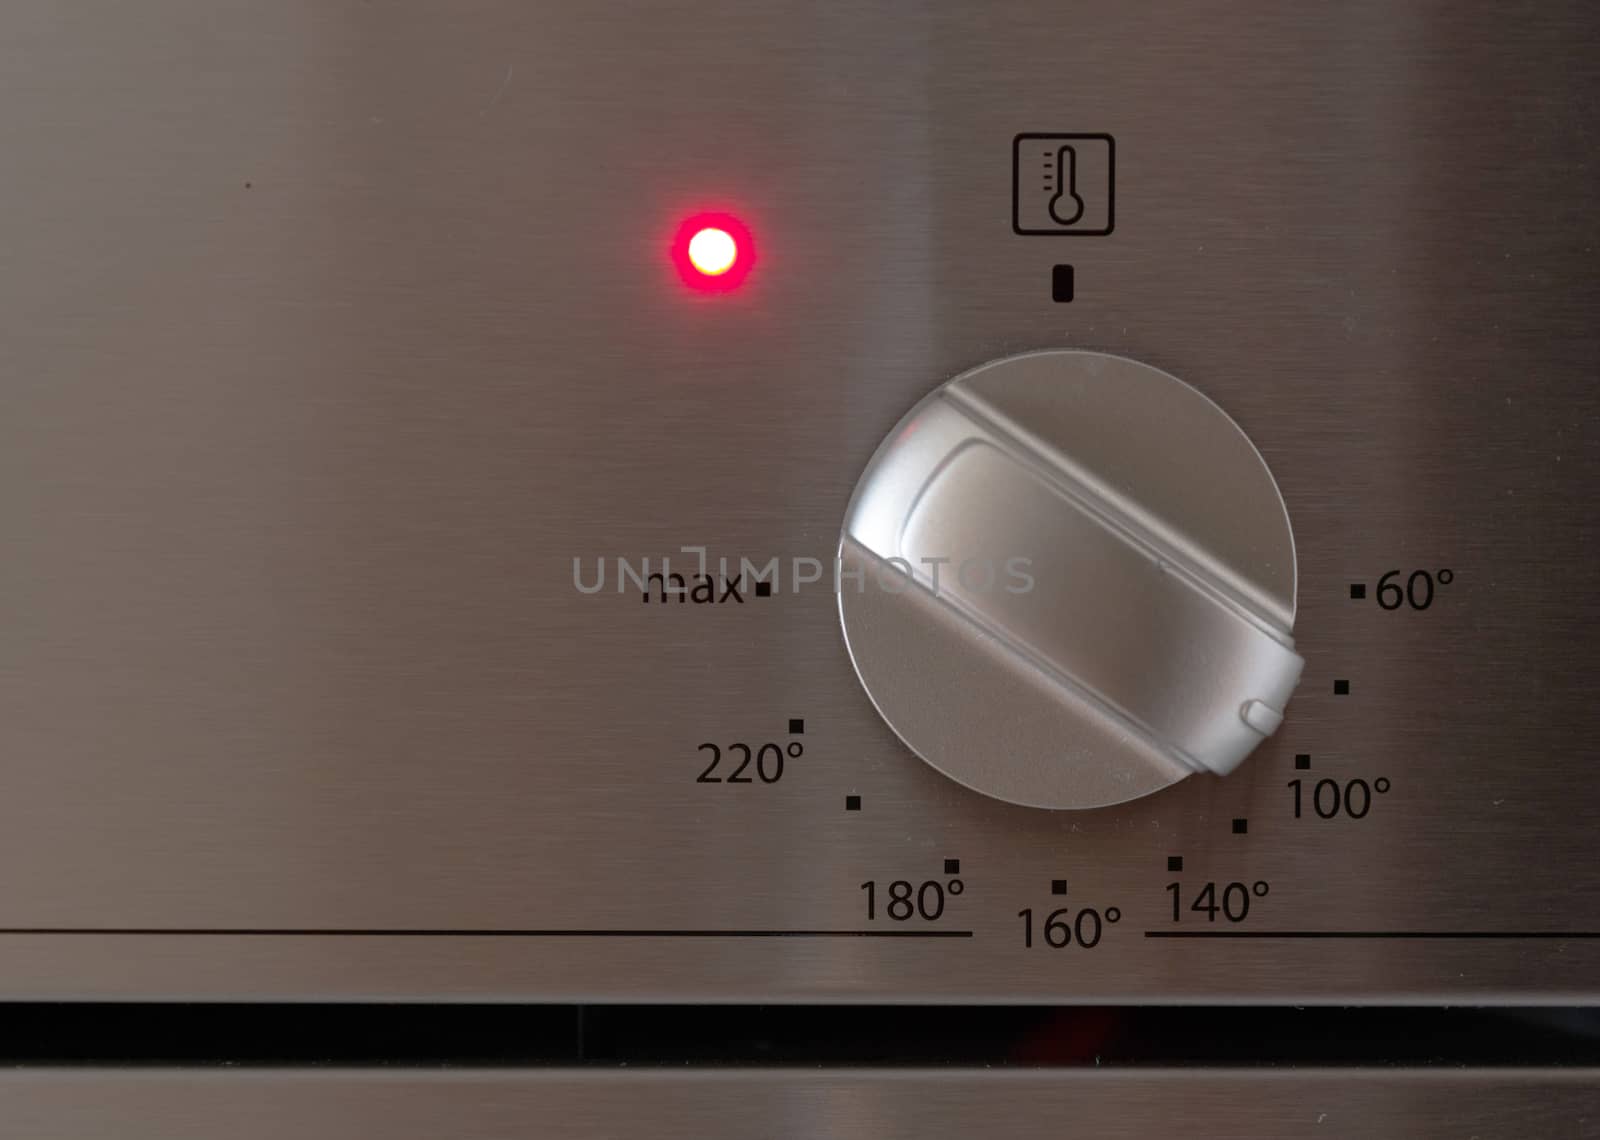 Temperature indicator of a modern oven